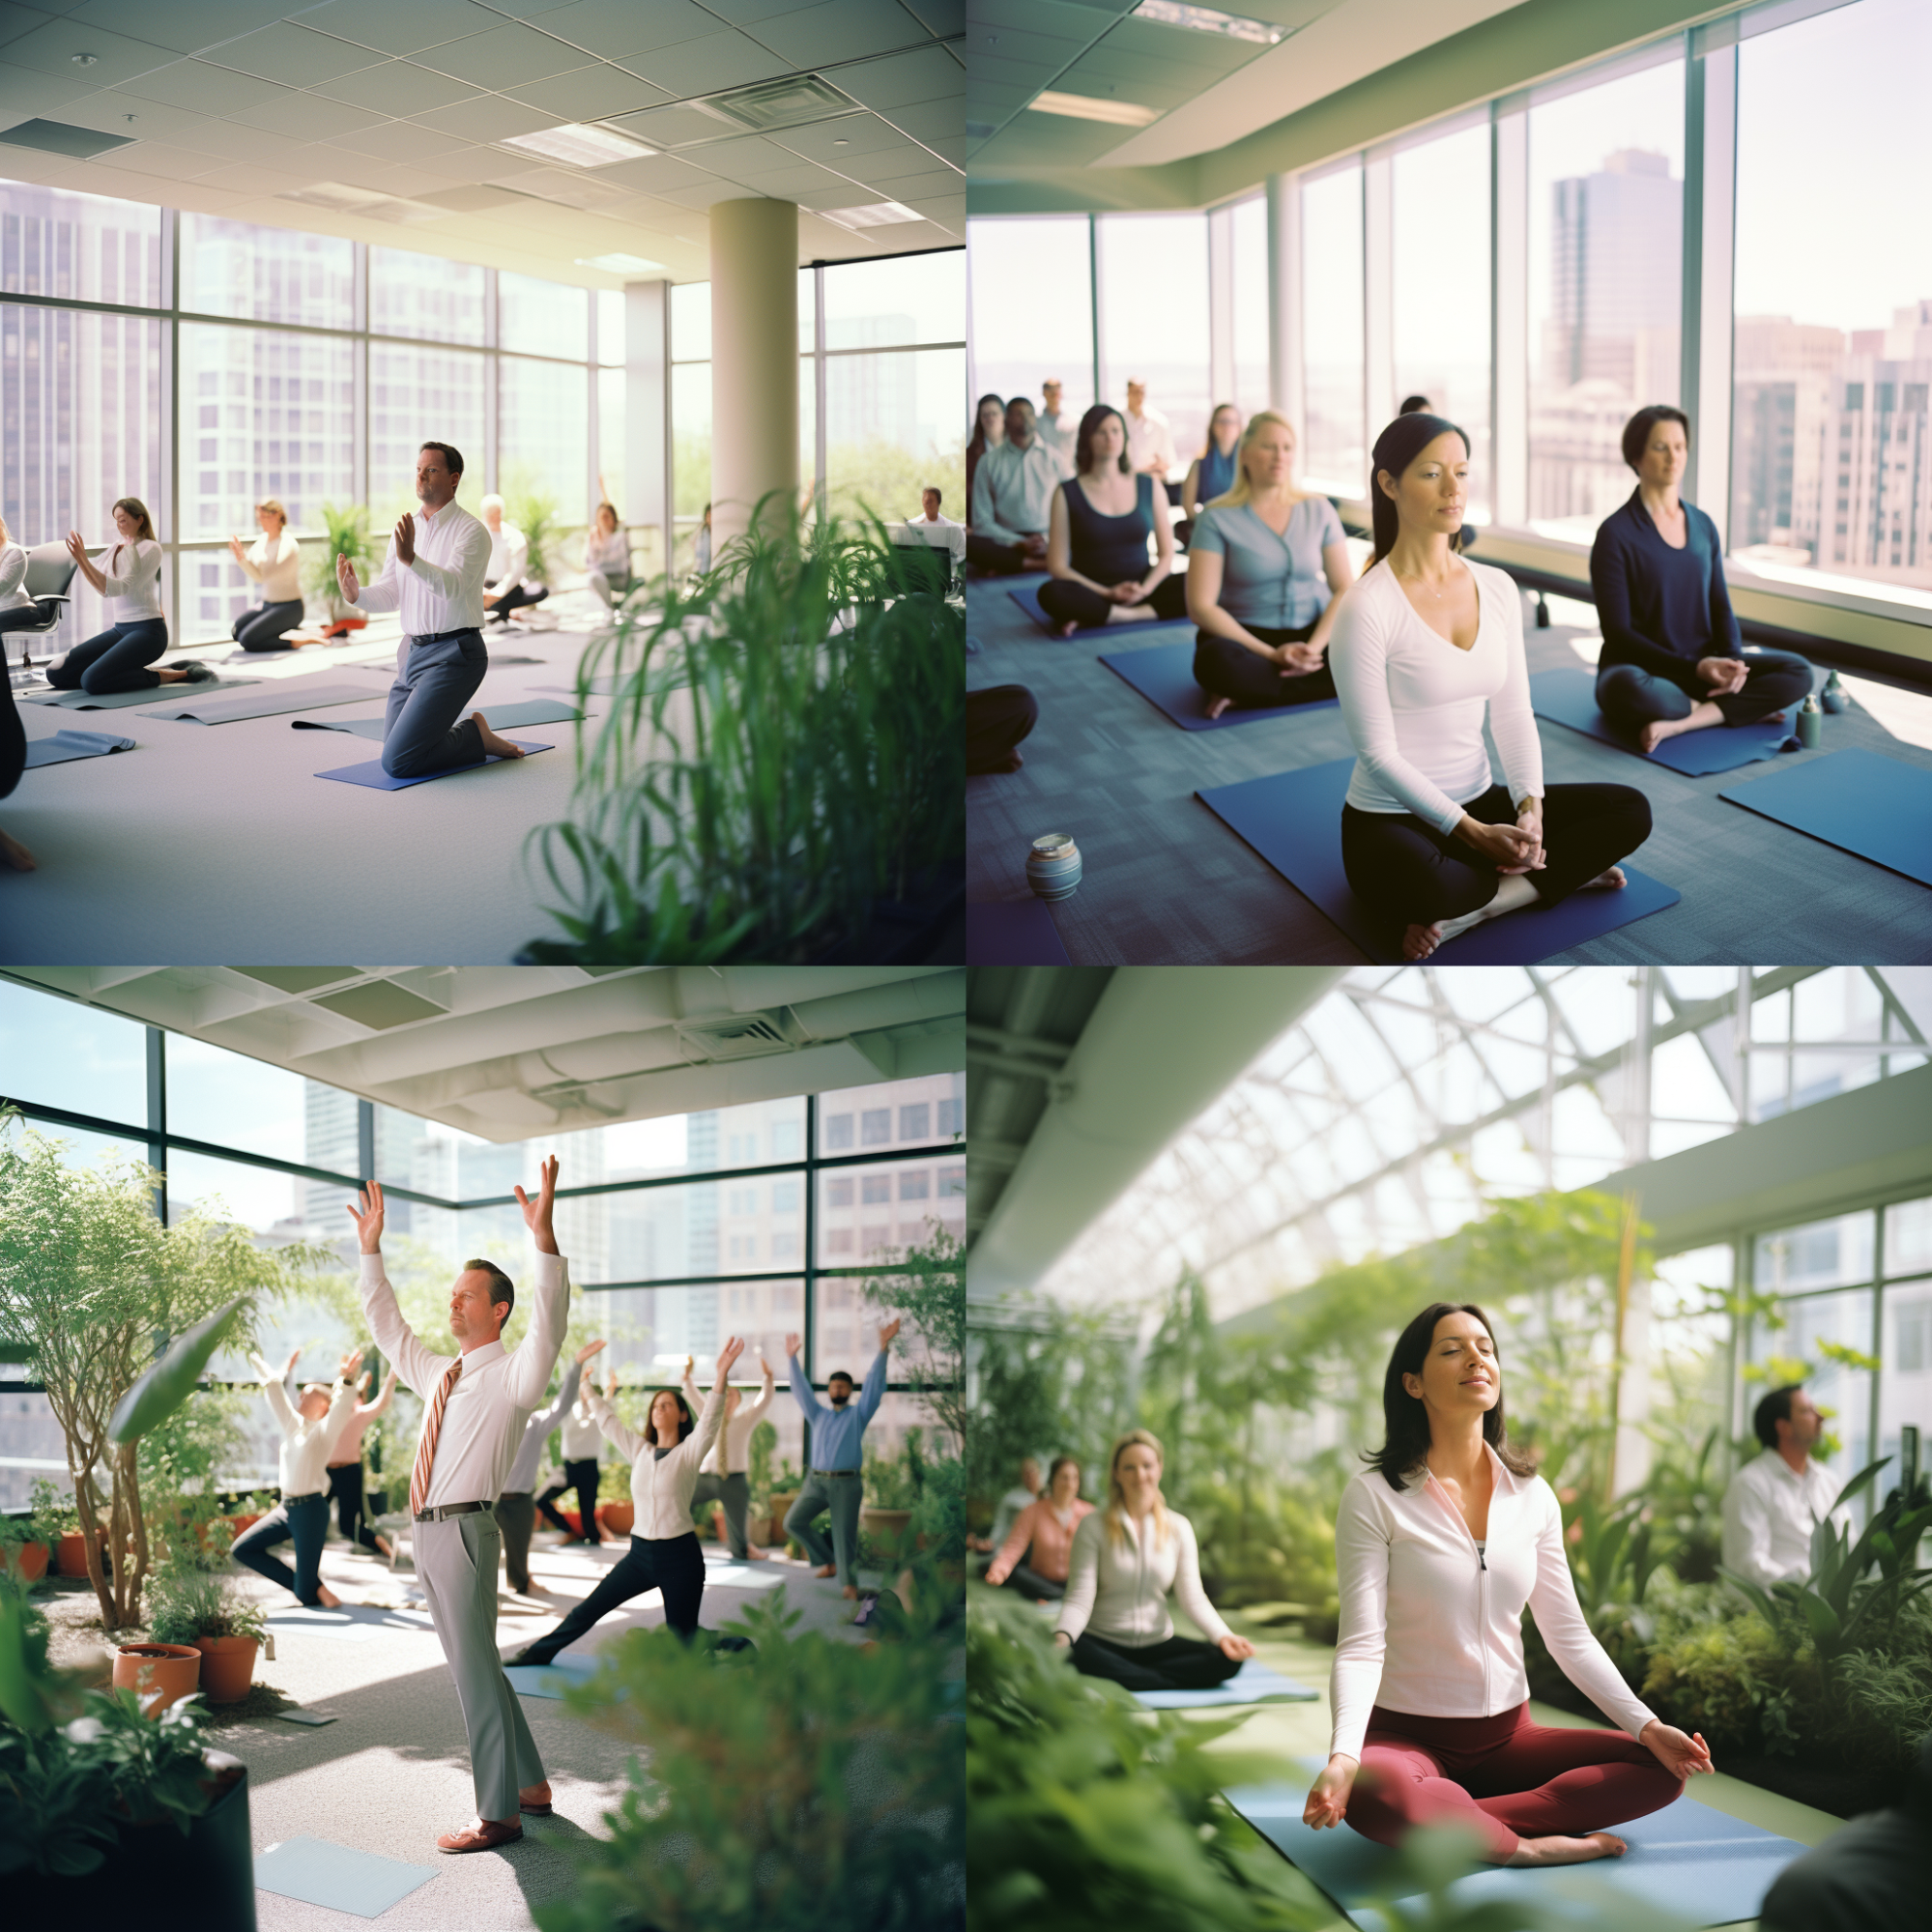 Four image options generated by Midjourney based on a corporate wellness initiatives prompt